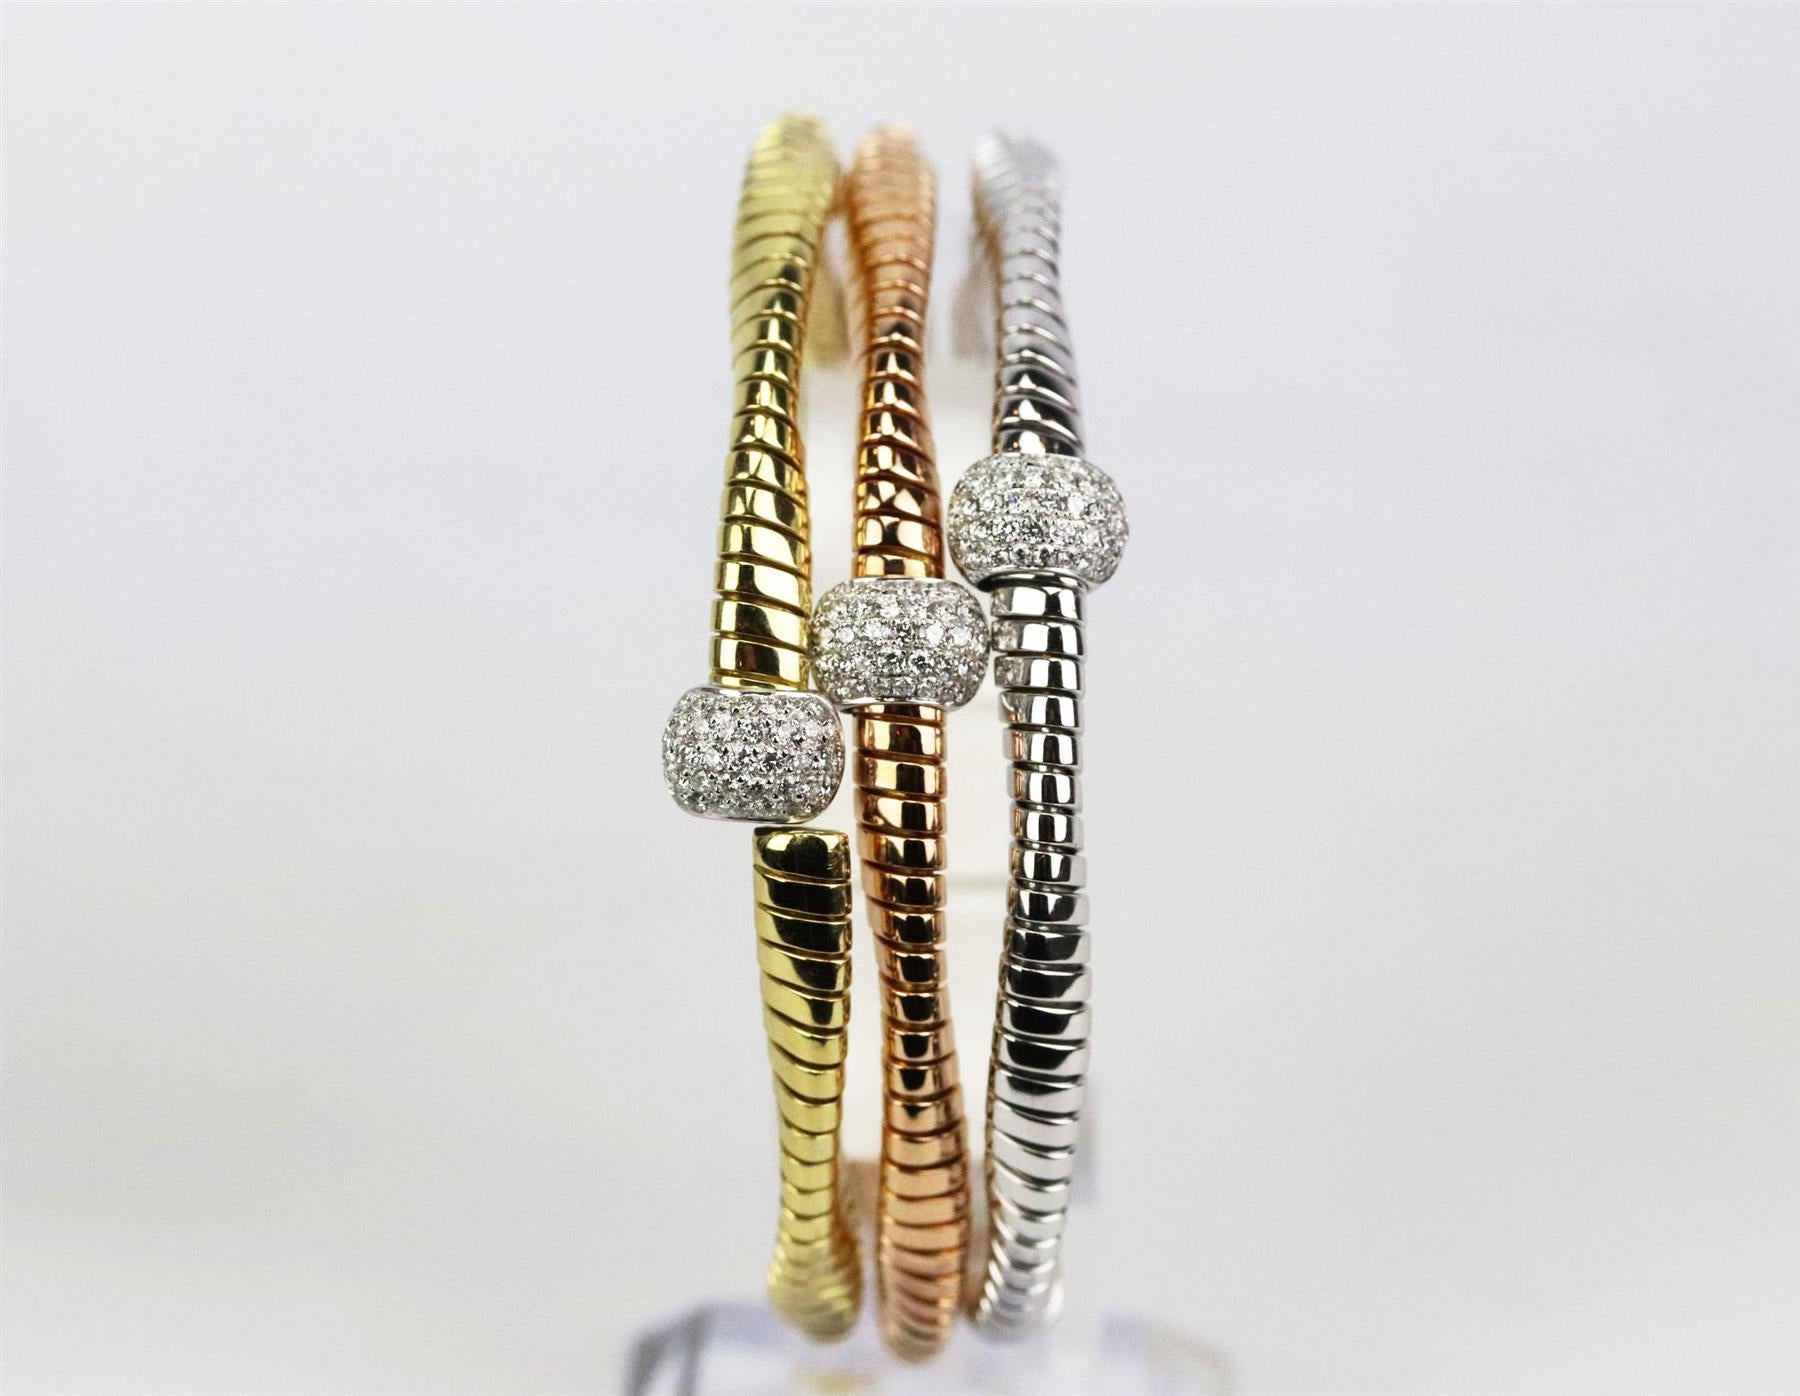 This set of 3 bracelets by Oro Trend is made from 18k rose gold, yellow gold and white gold twisted band with pave white diamond beads on the front. 18k yellow gold, rose gold and white gold. Slide fastening at diamond link. Does not come with box